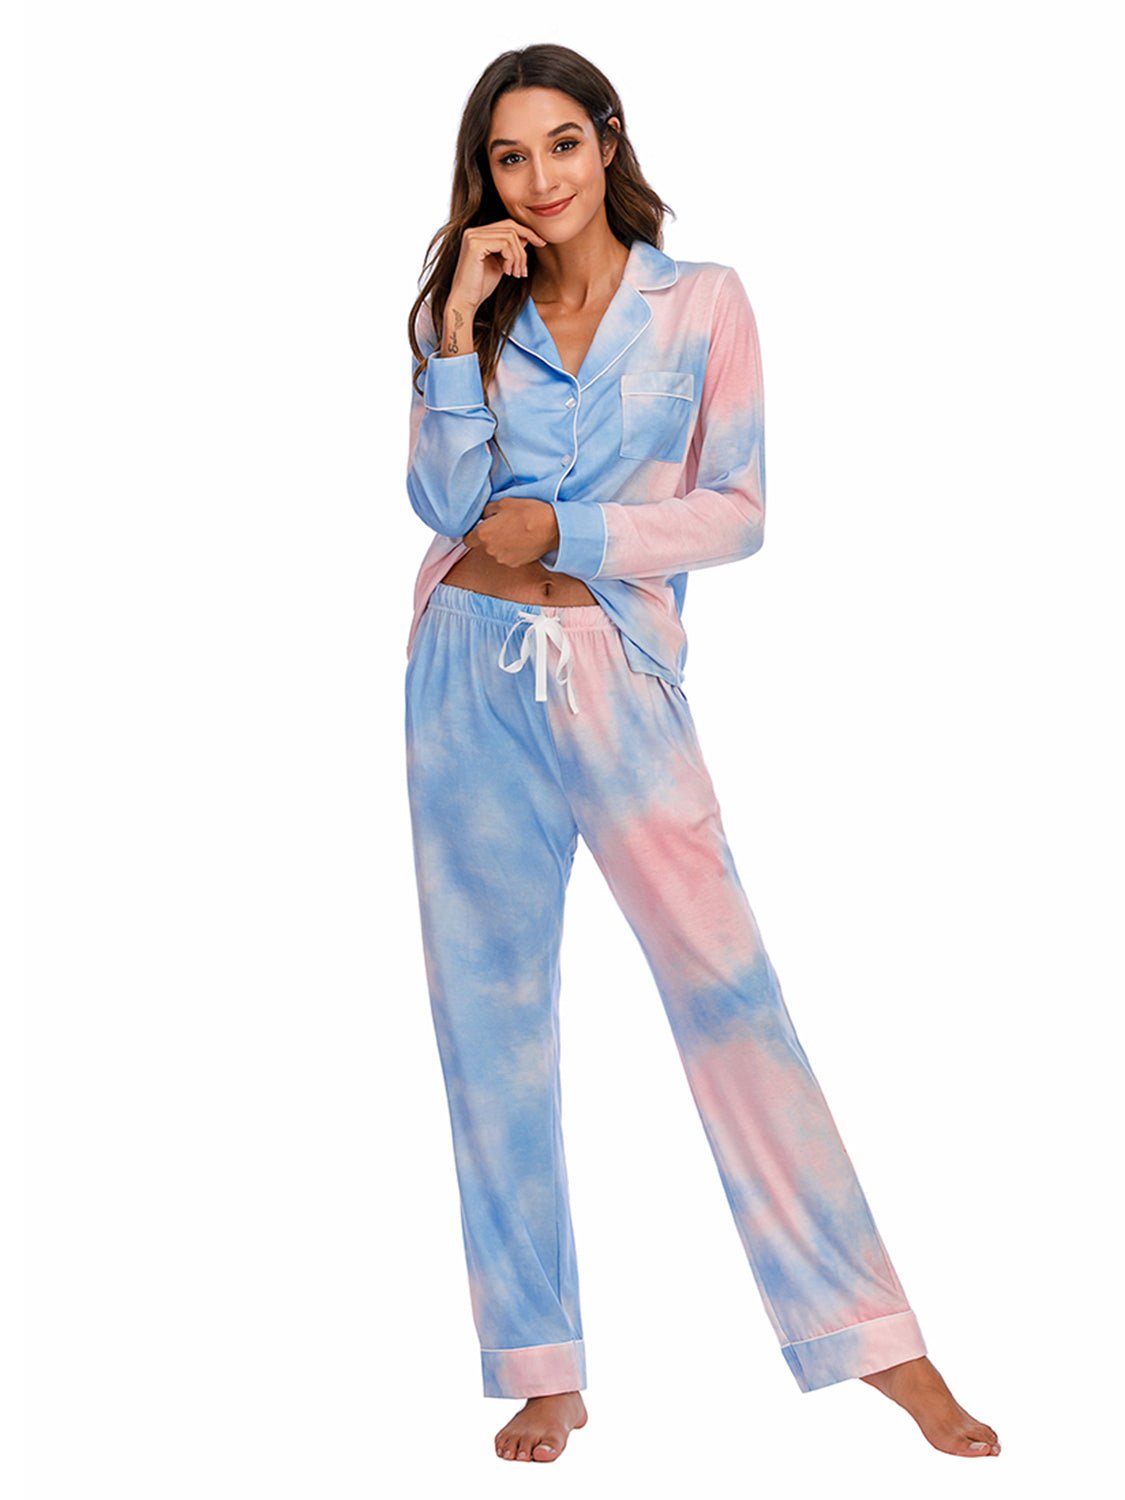 Collared Neck Long Sleeve Loungewear Set with Pockets - OMG! Rose